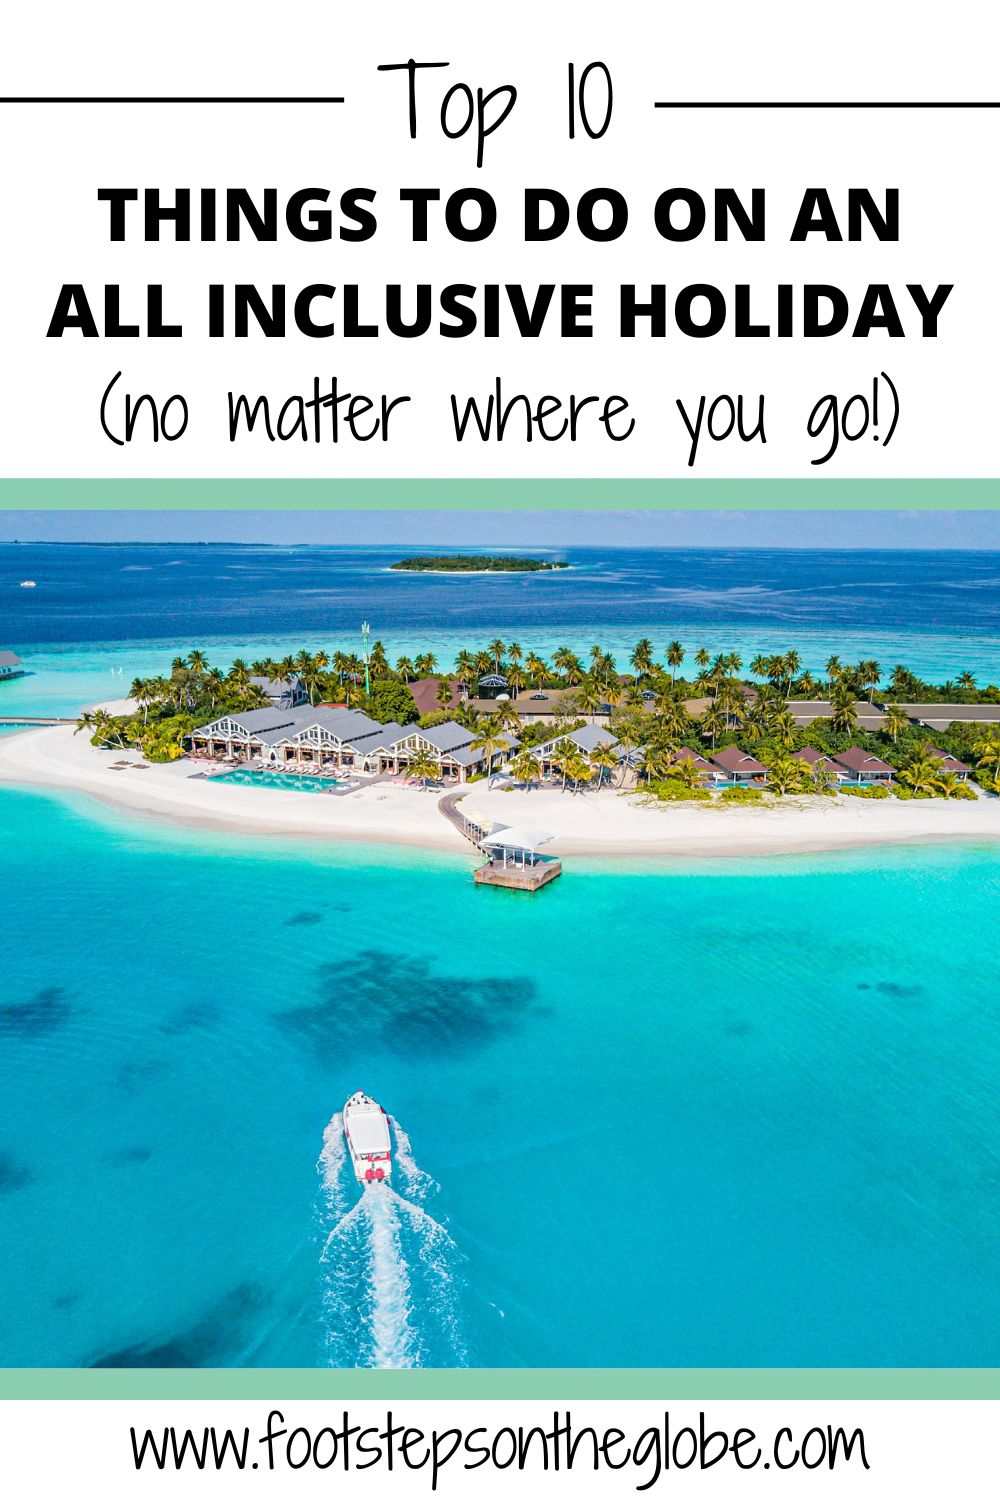 Image of a boat driving towards a tropical island with the text: top 10 things to do on an all inclusive holiday (no matter where you go!) over the top 